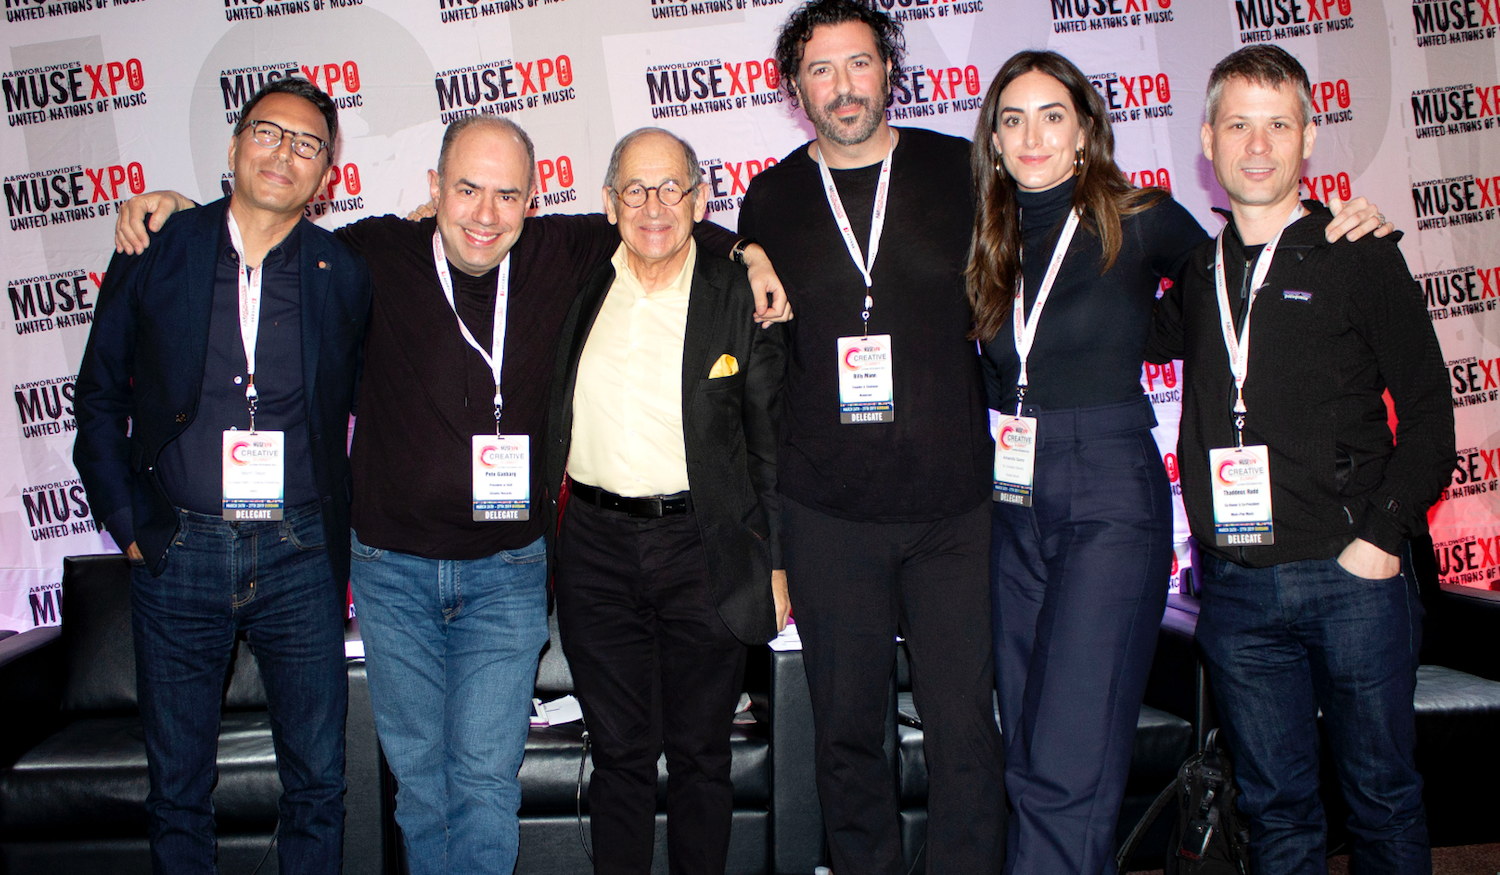 MUSEXPO 2019: Eye opener into the state of the music biz [day 1]